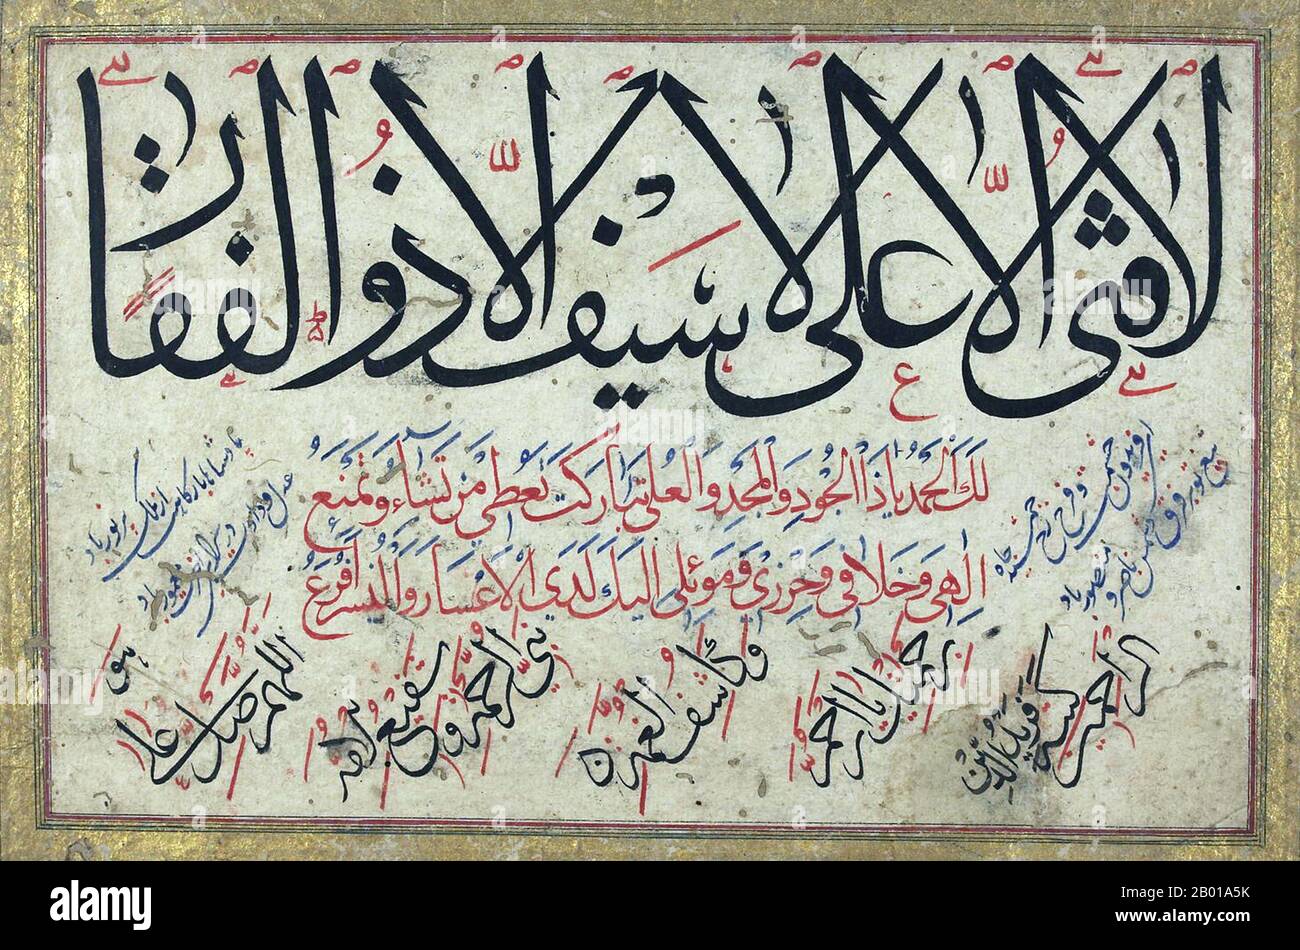 Syria: Illuminated panel (levha) praising Imam 'Ali, the Prophet Muhammad's son-in-law, and his celebrated sword, Dhu al-Fiqar, both sacred to Shia and Alawi Islam. By Farid al-Din, 19th century.  This Arabic panel praises Muhammad's son-in-law 'Ali and his famous double-edged sword Dhu al-Fiqar, which he inherited from the Prophet, with the topmost statement executed in black ink: 'There is no victory except in 'Ali [and] there is no sword except Dhu al-Fiqar' (la fath ila 'Ali, la sayf ila Dhu al-Fiqar). Stock Photo